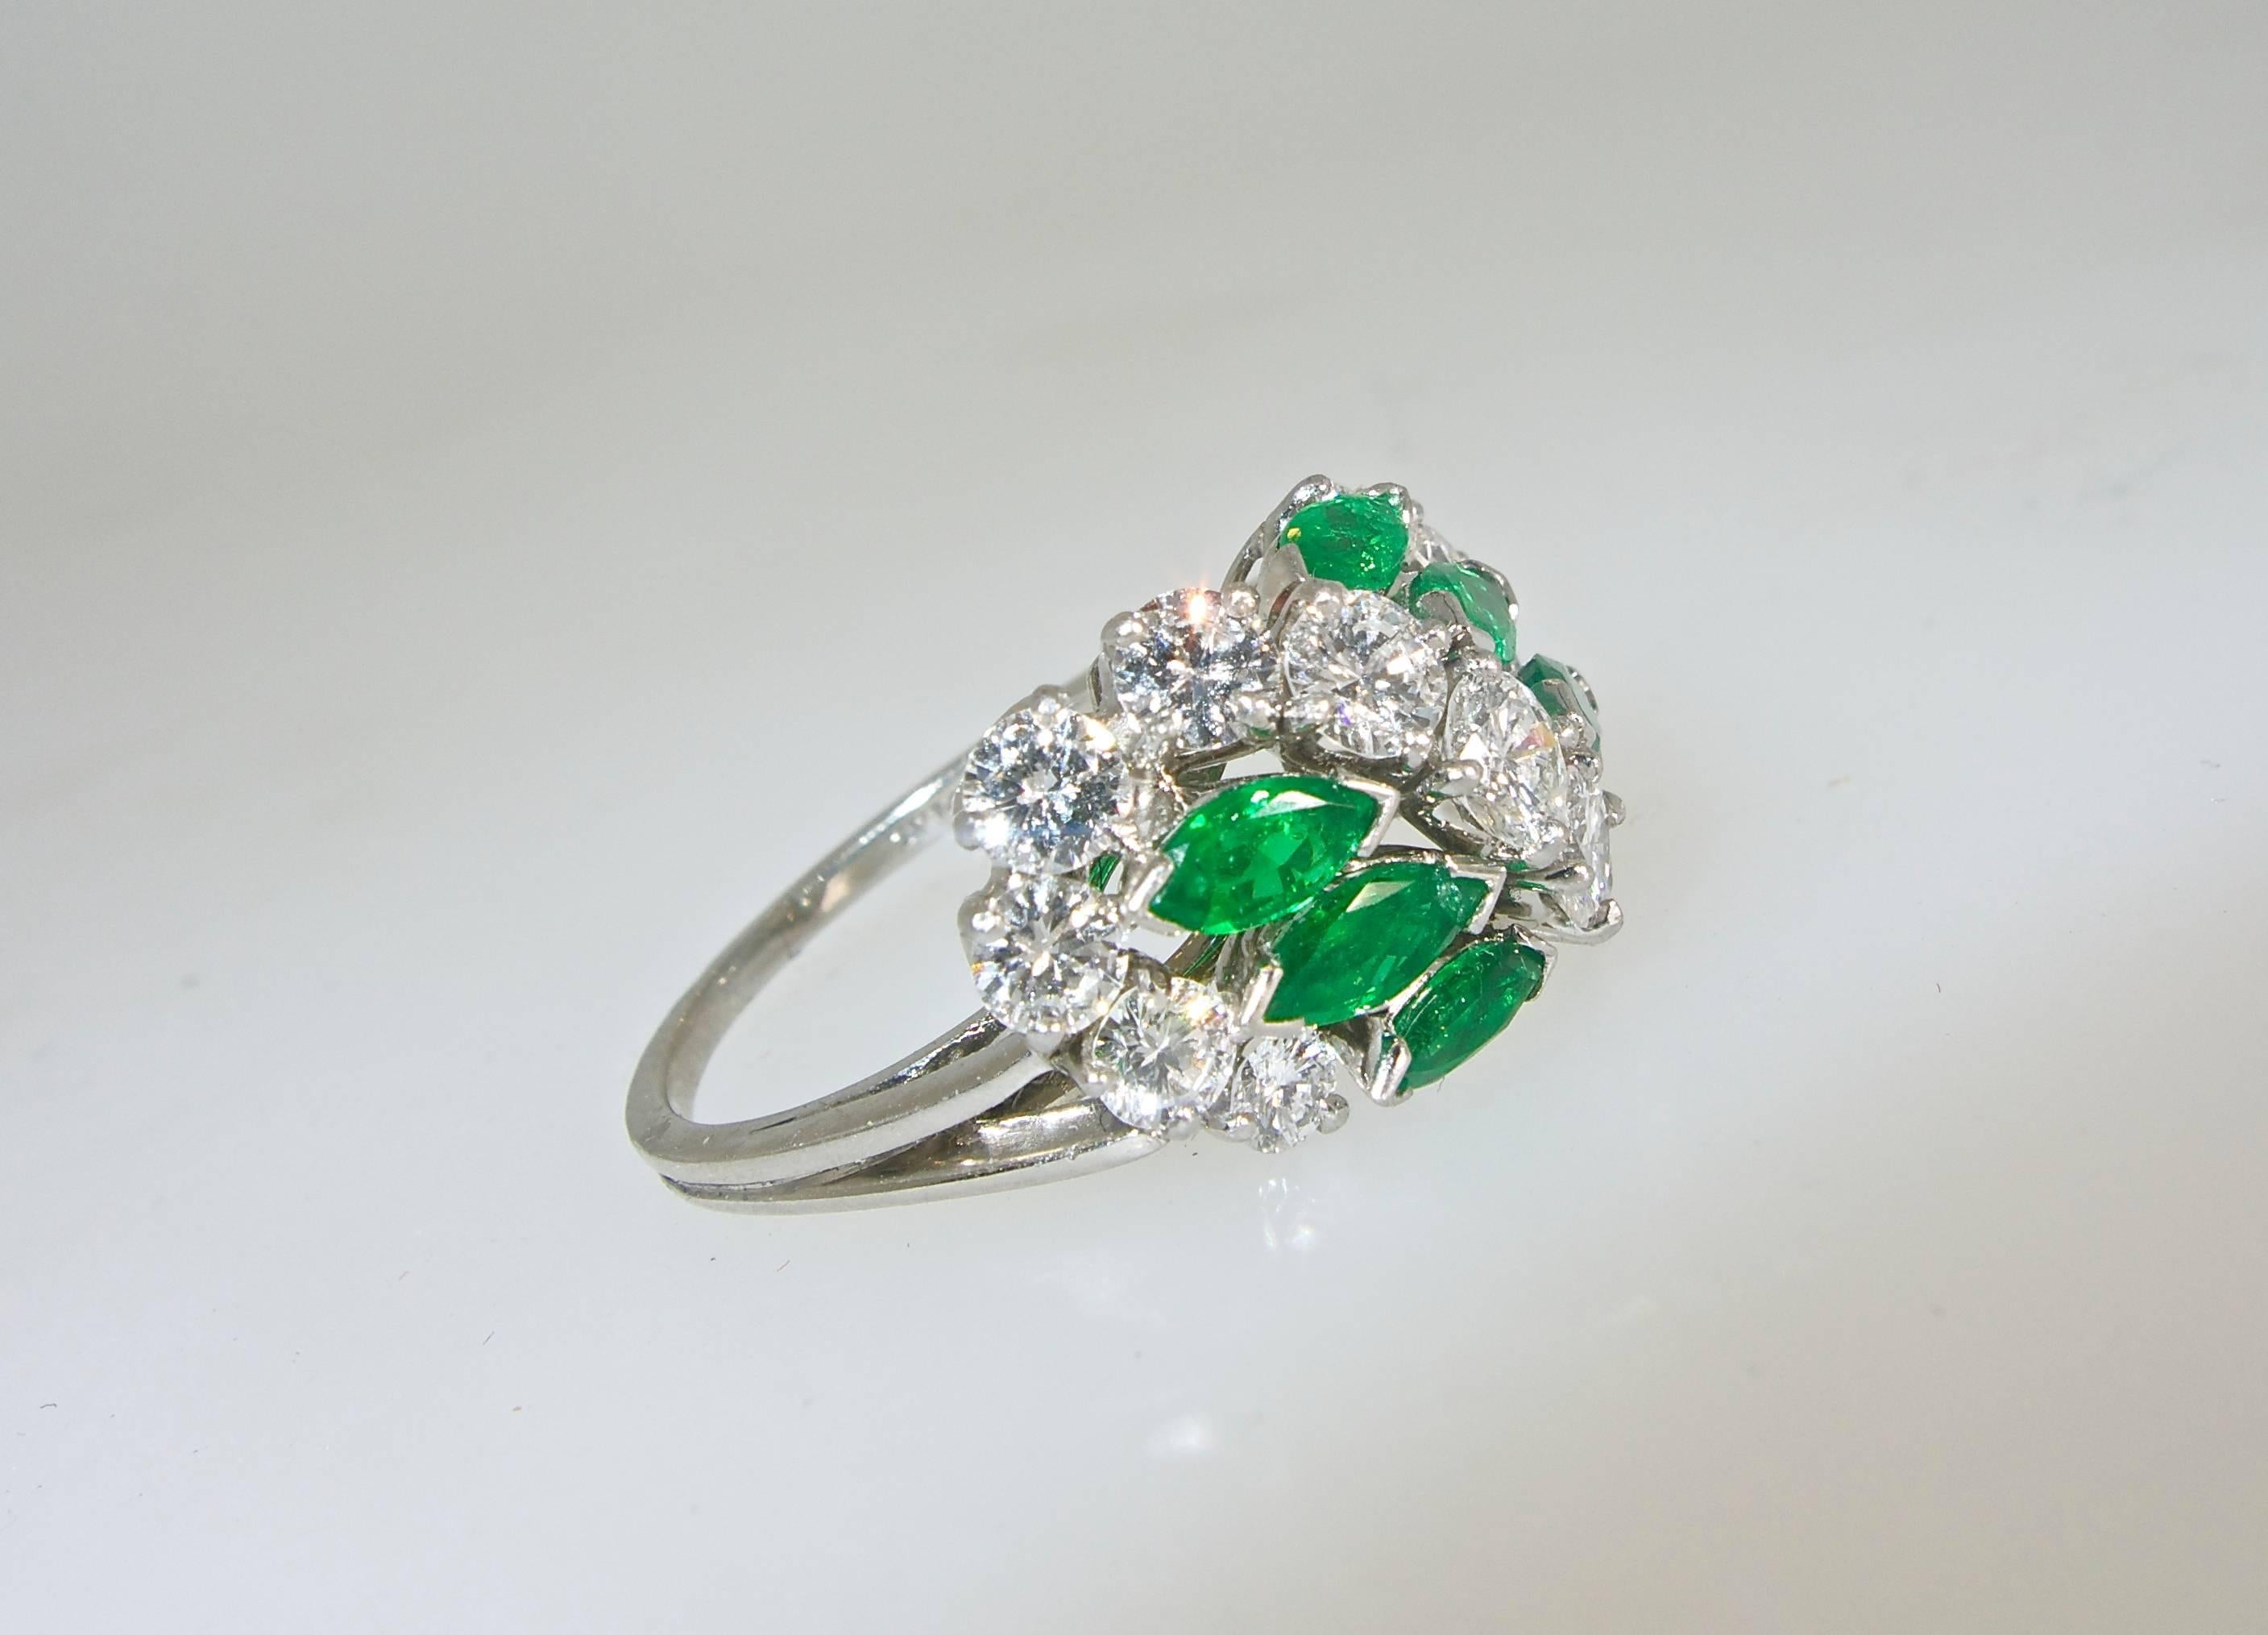 Signed and numbered by the world famous House of Cartier, this ring possesses 1.75 cts. of fine white diamonds and .70 cts. of bright green emeralds.  The ringis now a size 6.5 and can easily be sized.